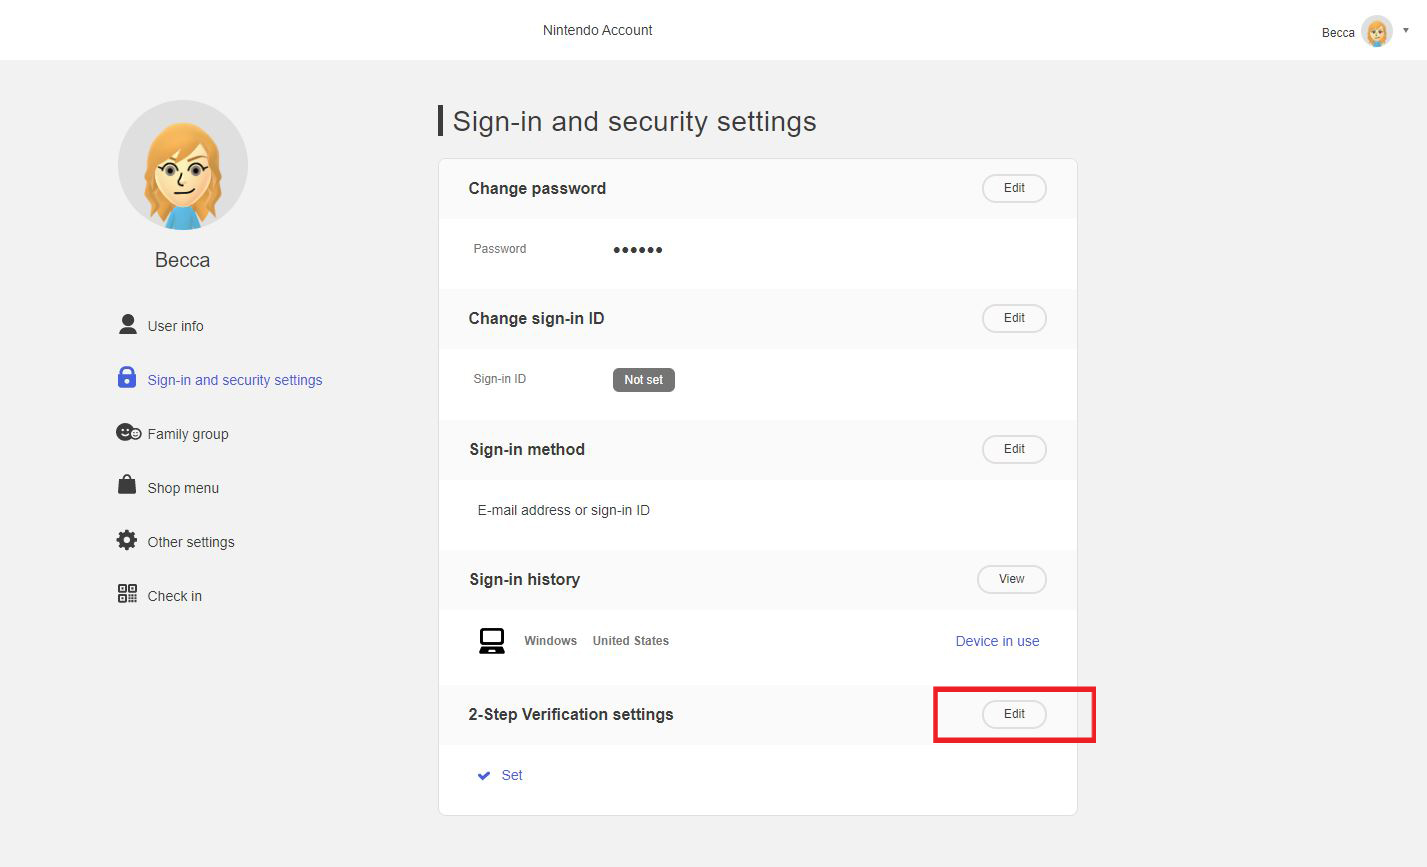 https://www.imore.com/sites/imore.com/files/styles/large/public/field/image/2020/04/how-to-two-factor-authentication-nintendo-switch-018_0.jpg?itok=MGQS0nRR